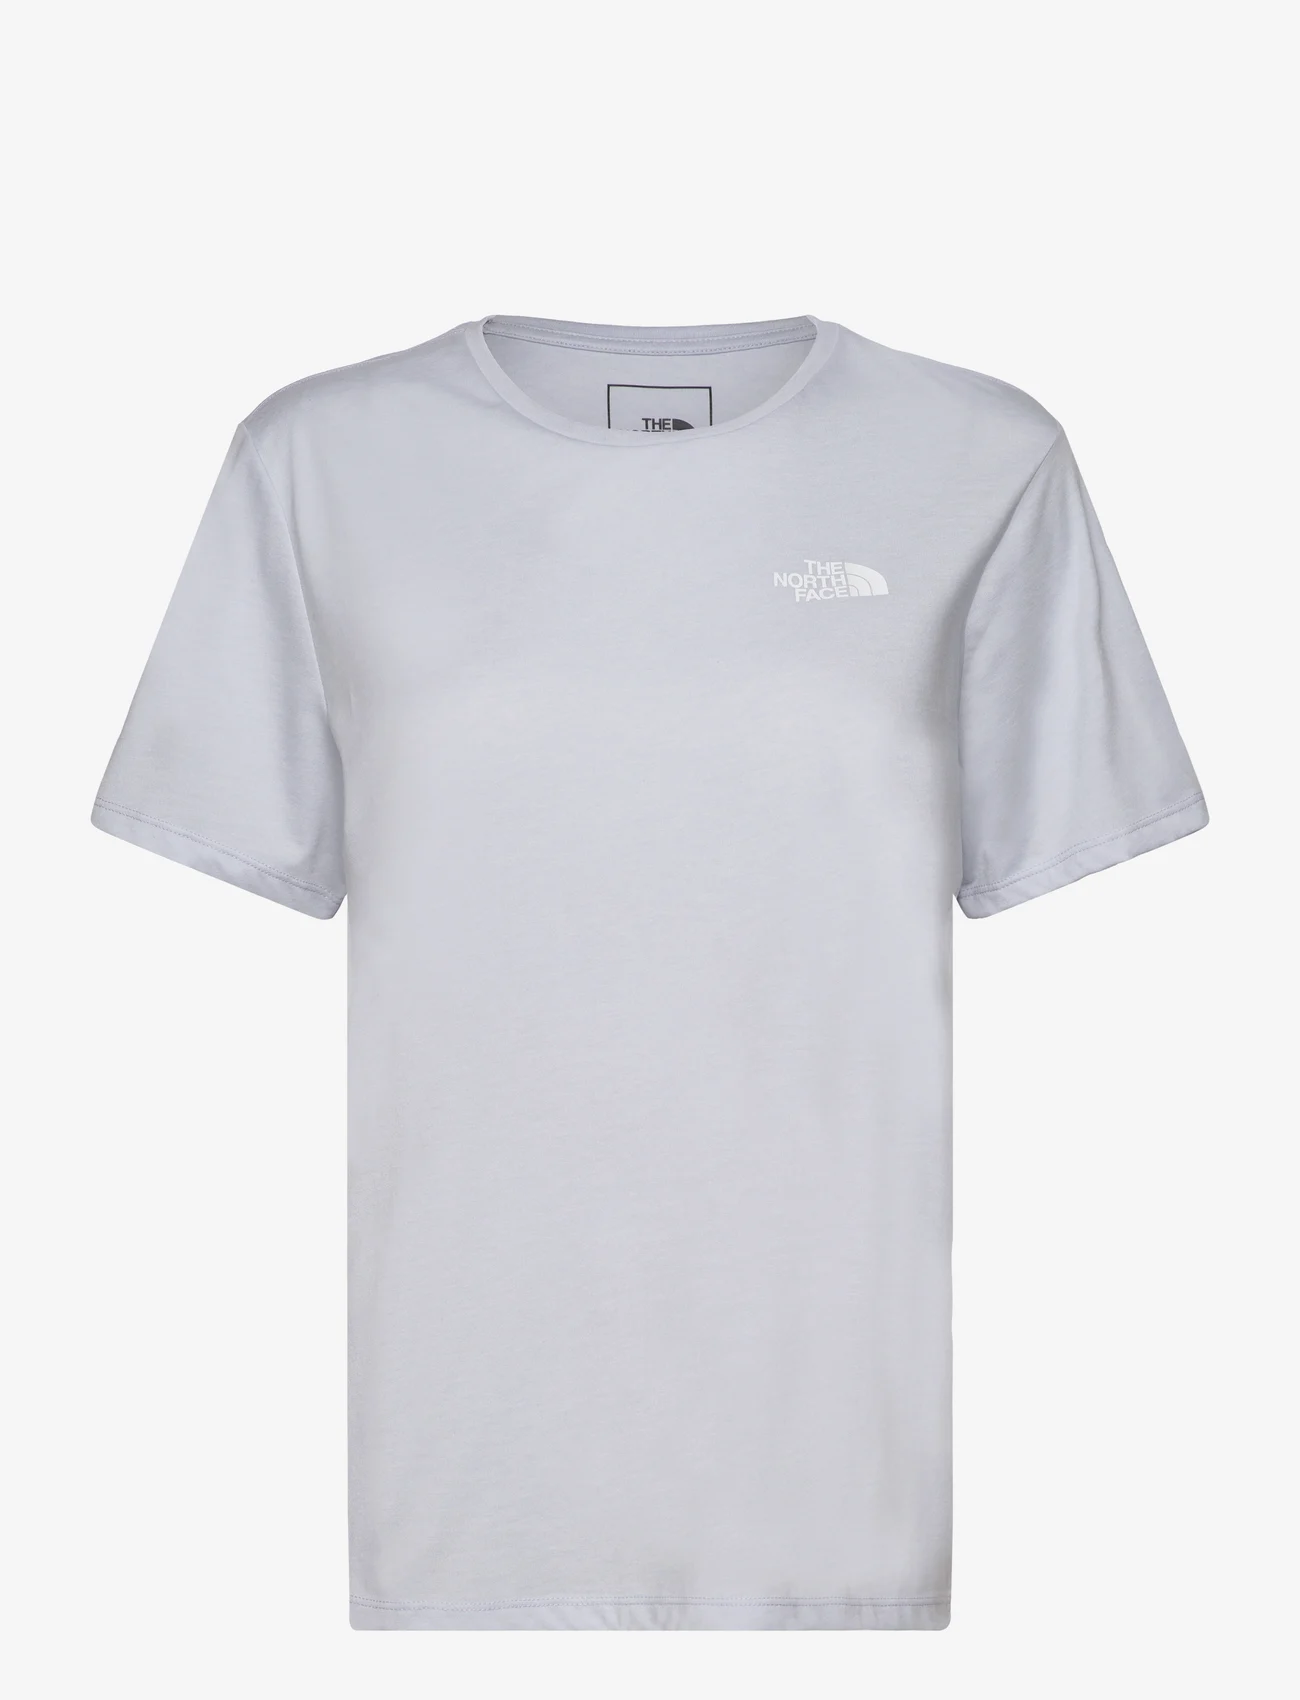 The North Face - W FOUNDATION GRAPHIC TEE - EU - dusty periwinkle - 0